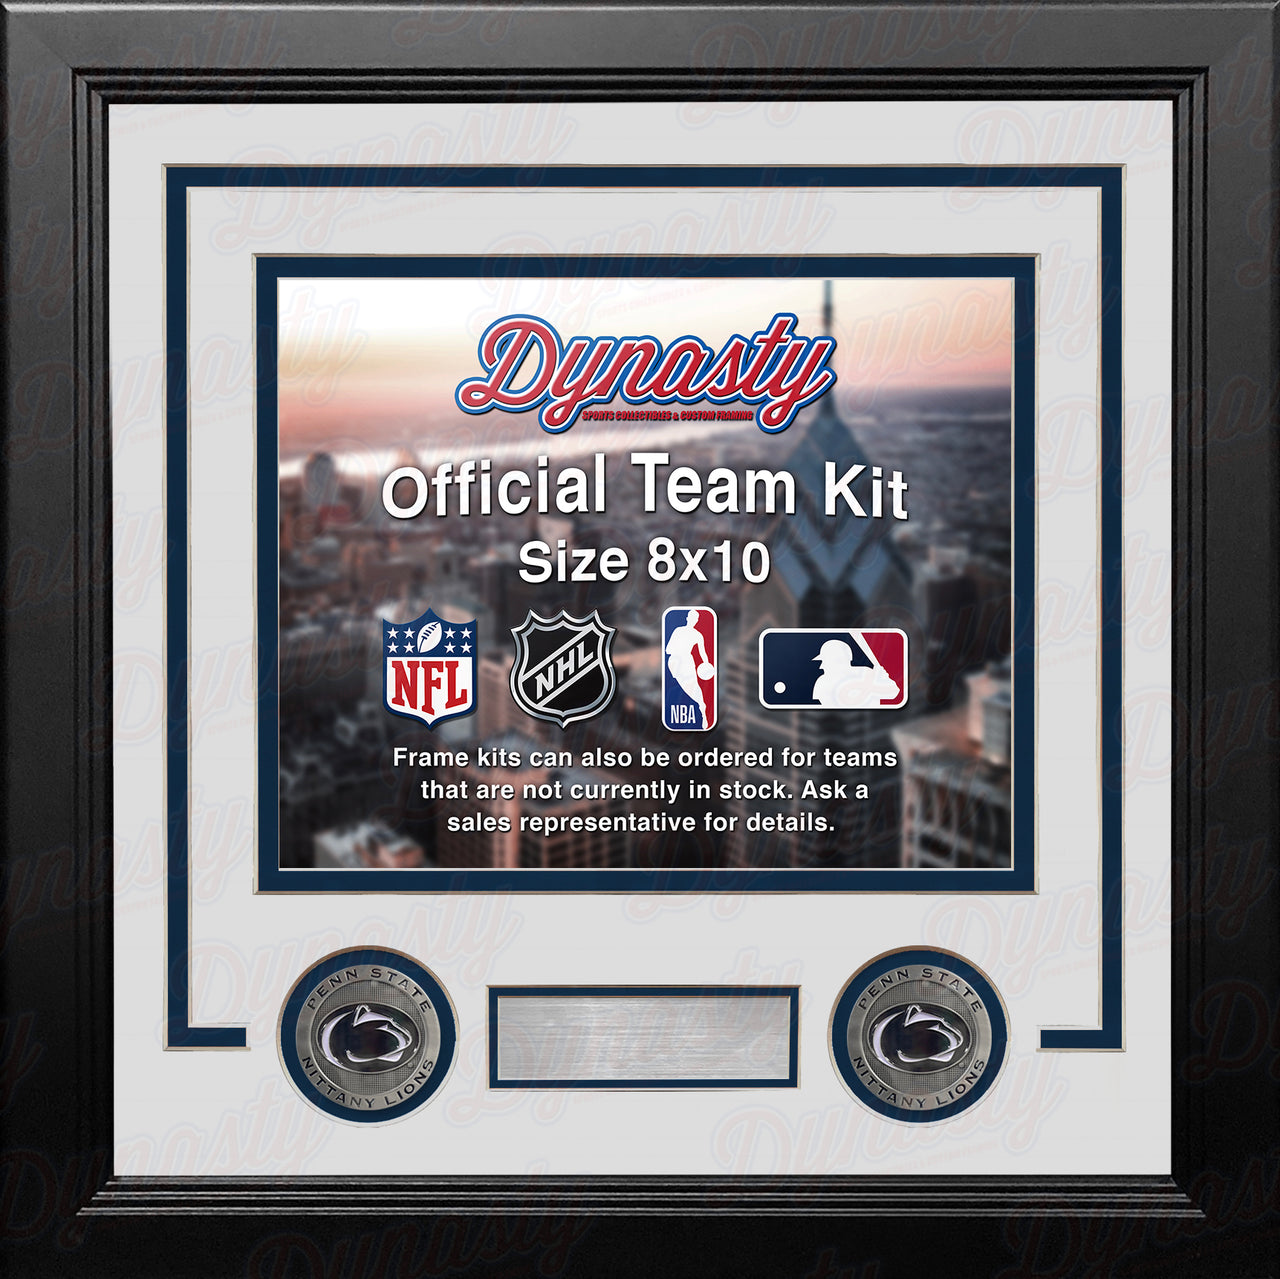 Penn State Nittany Lions Custom NCAA College 8x10 Picture Frame Kit (Multiple Colors) - Dynasty Sports & Framing 